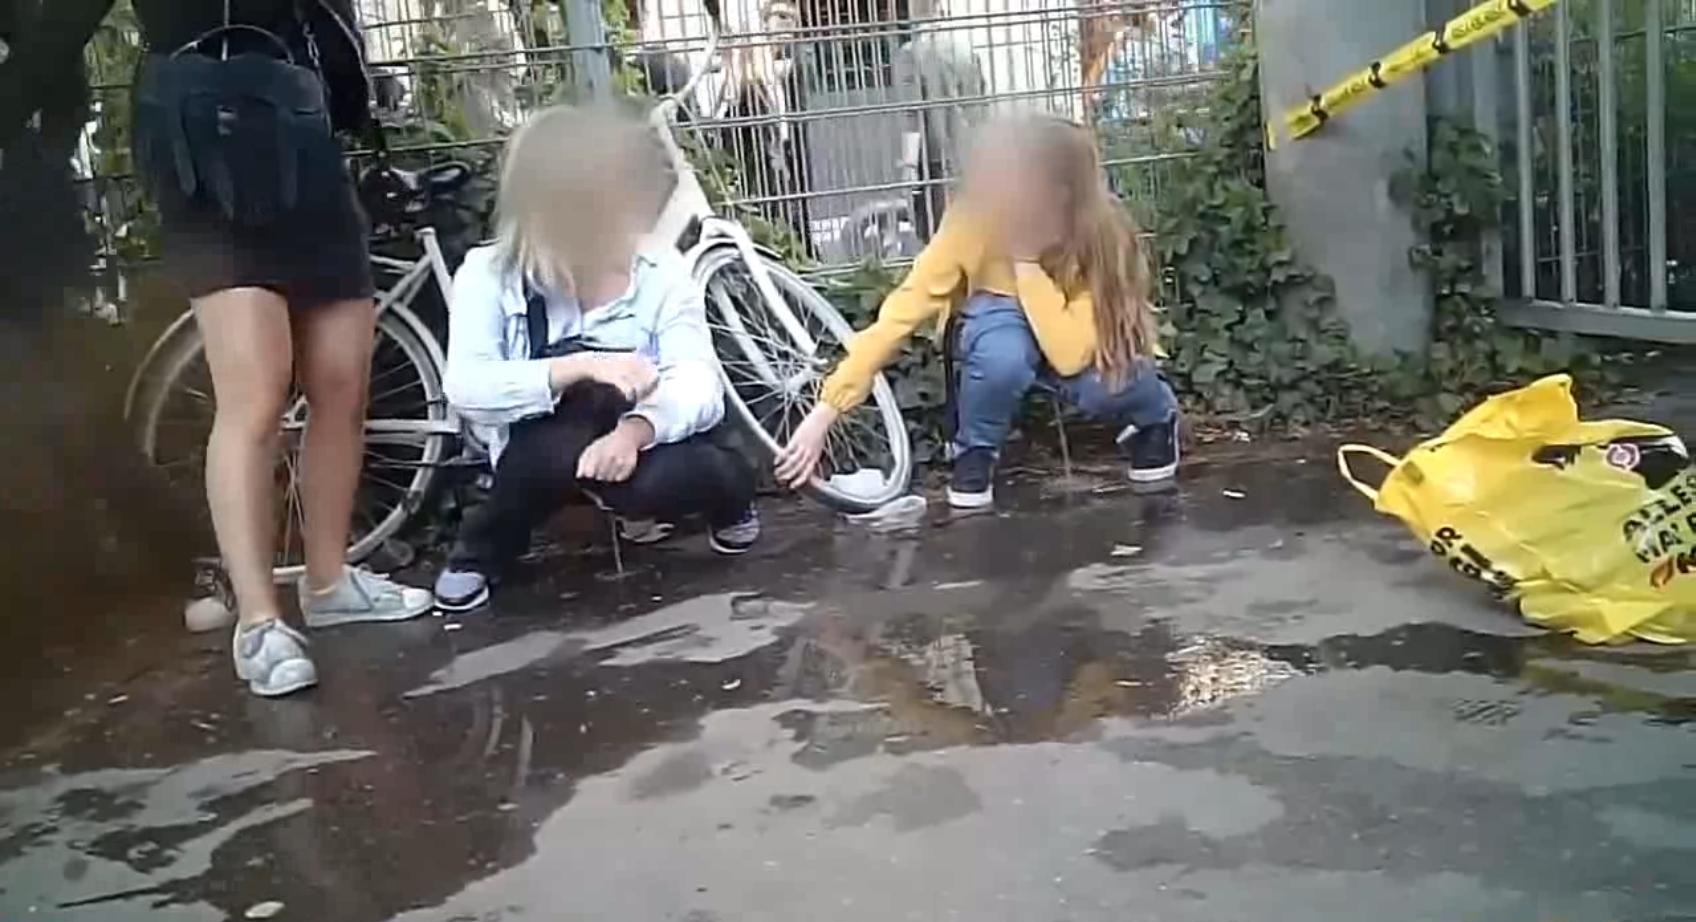 Two girls squat and piss on the asphalt